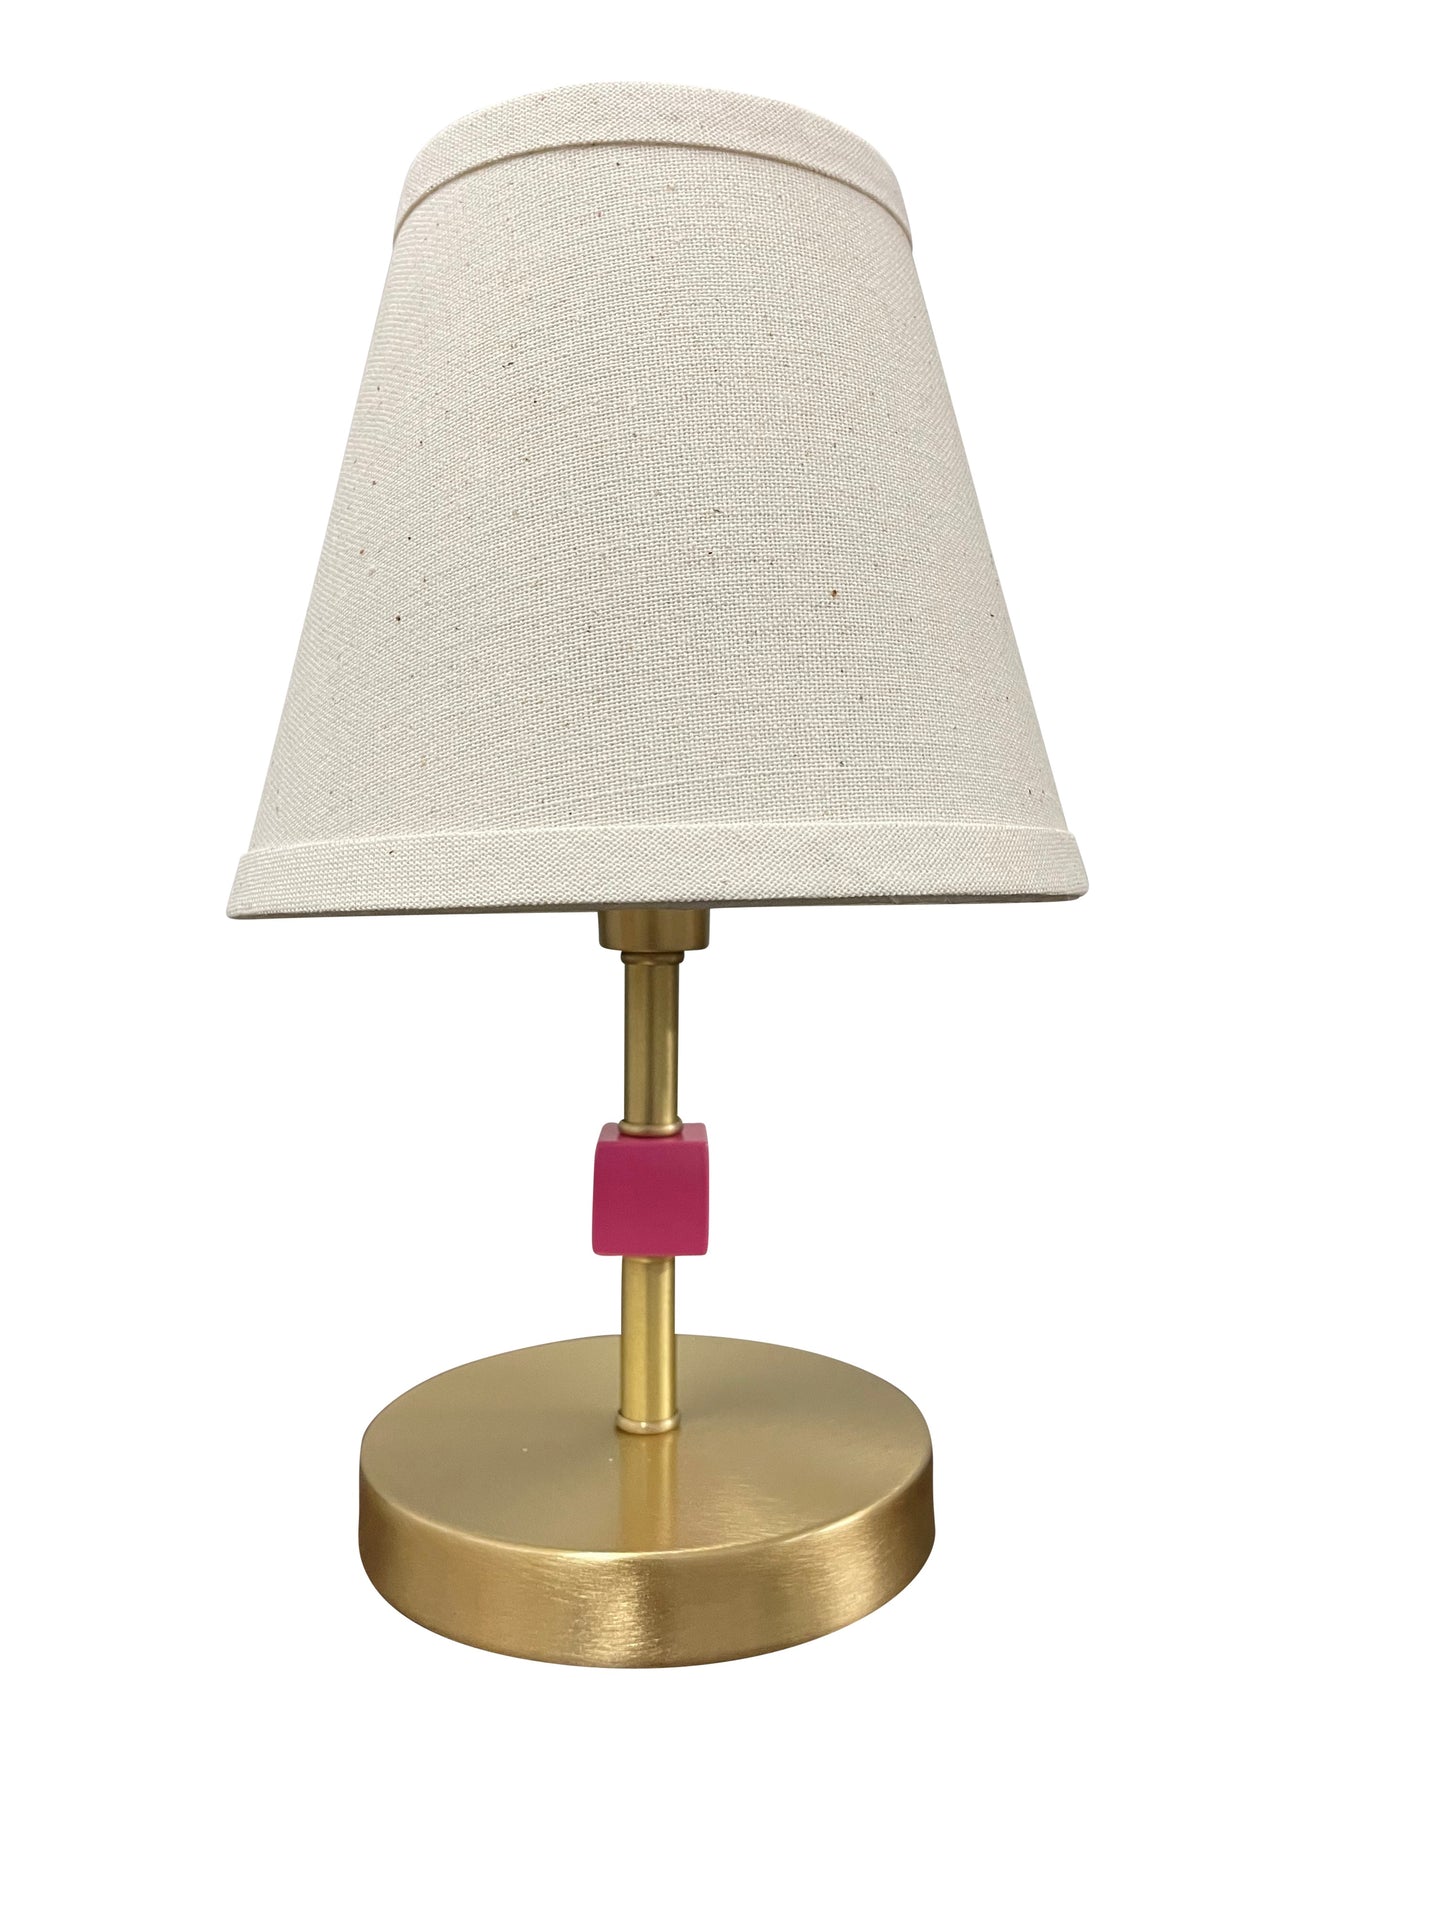 House of Troy Bryson Mini satin brass/orchid accent lamp B203-SB/OR